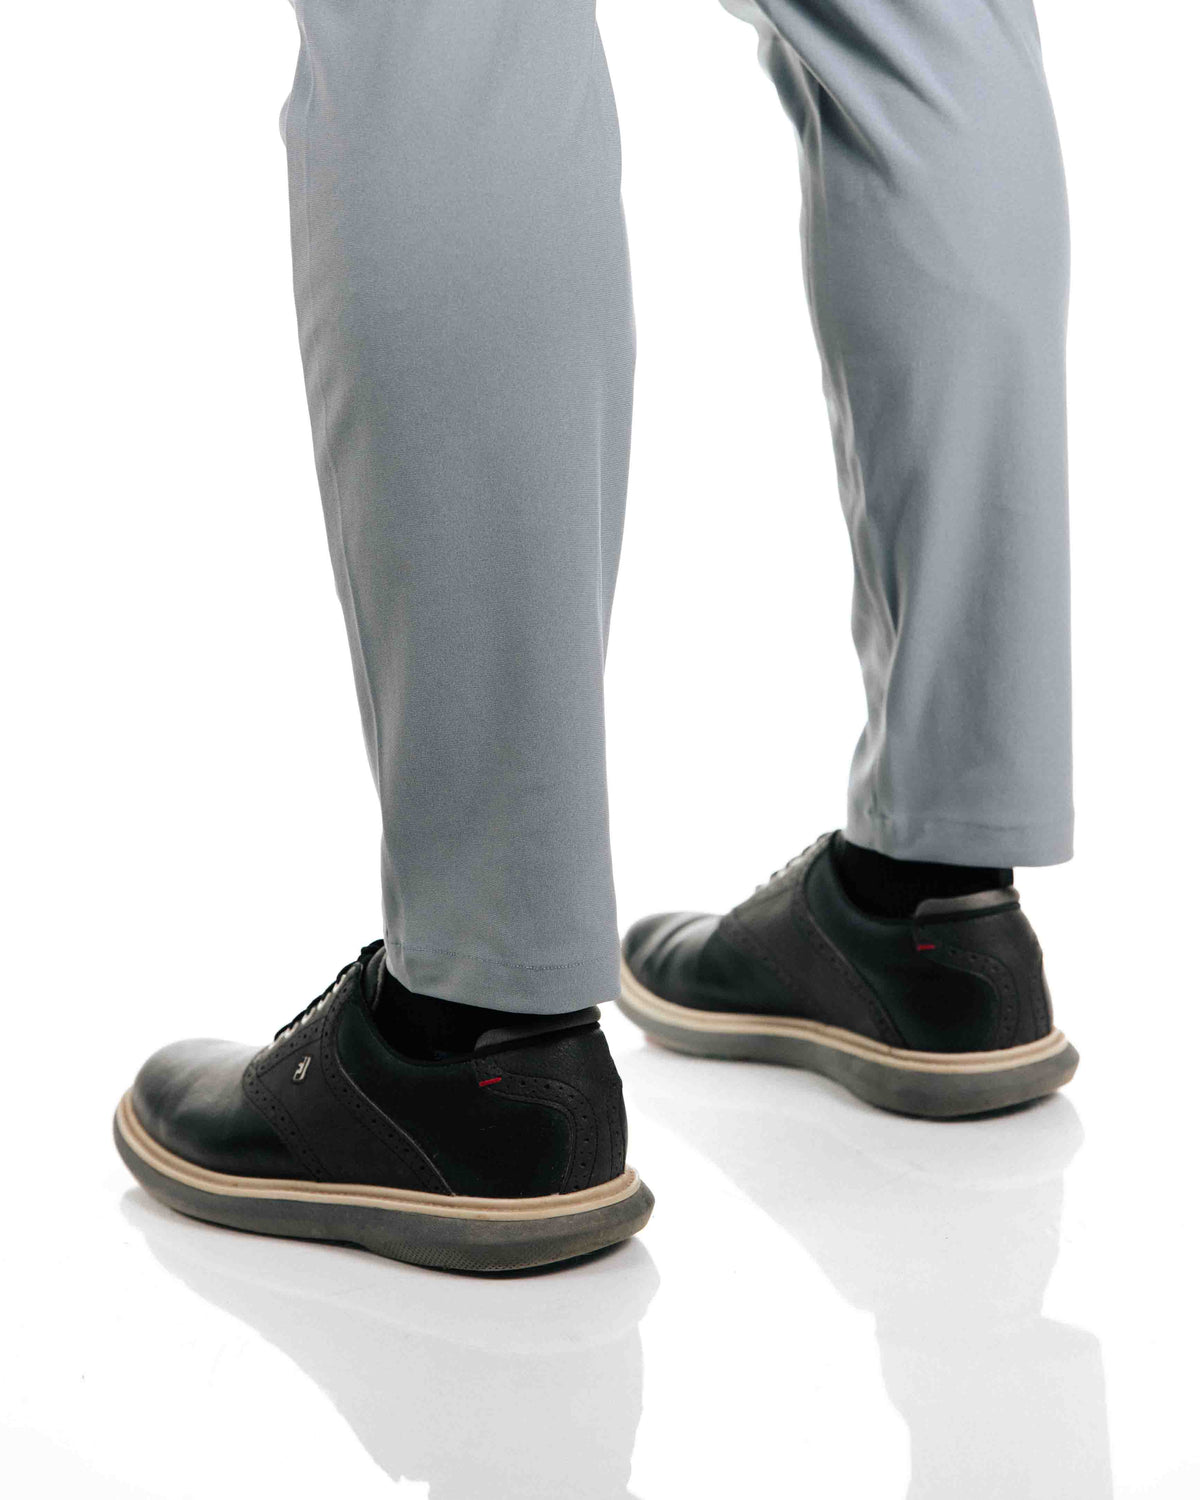 Primo Golf Traditional Pant - Light Gray cuff on both legs